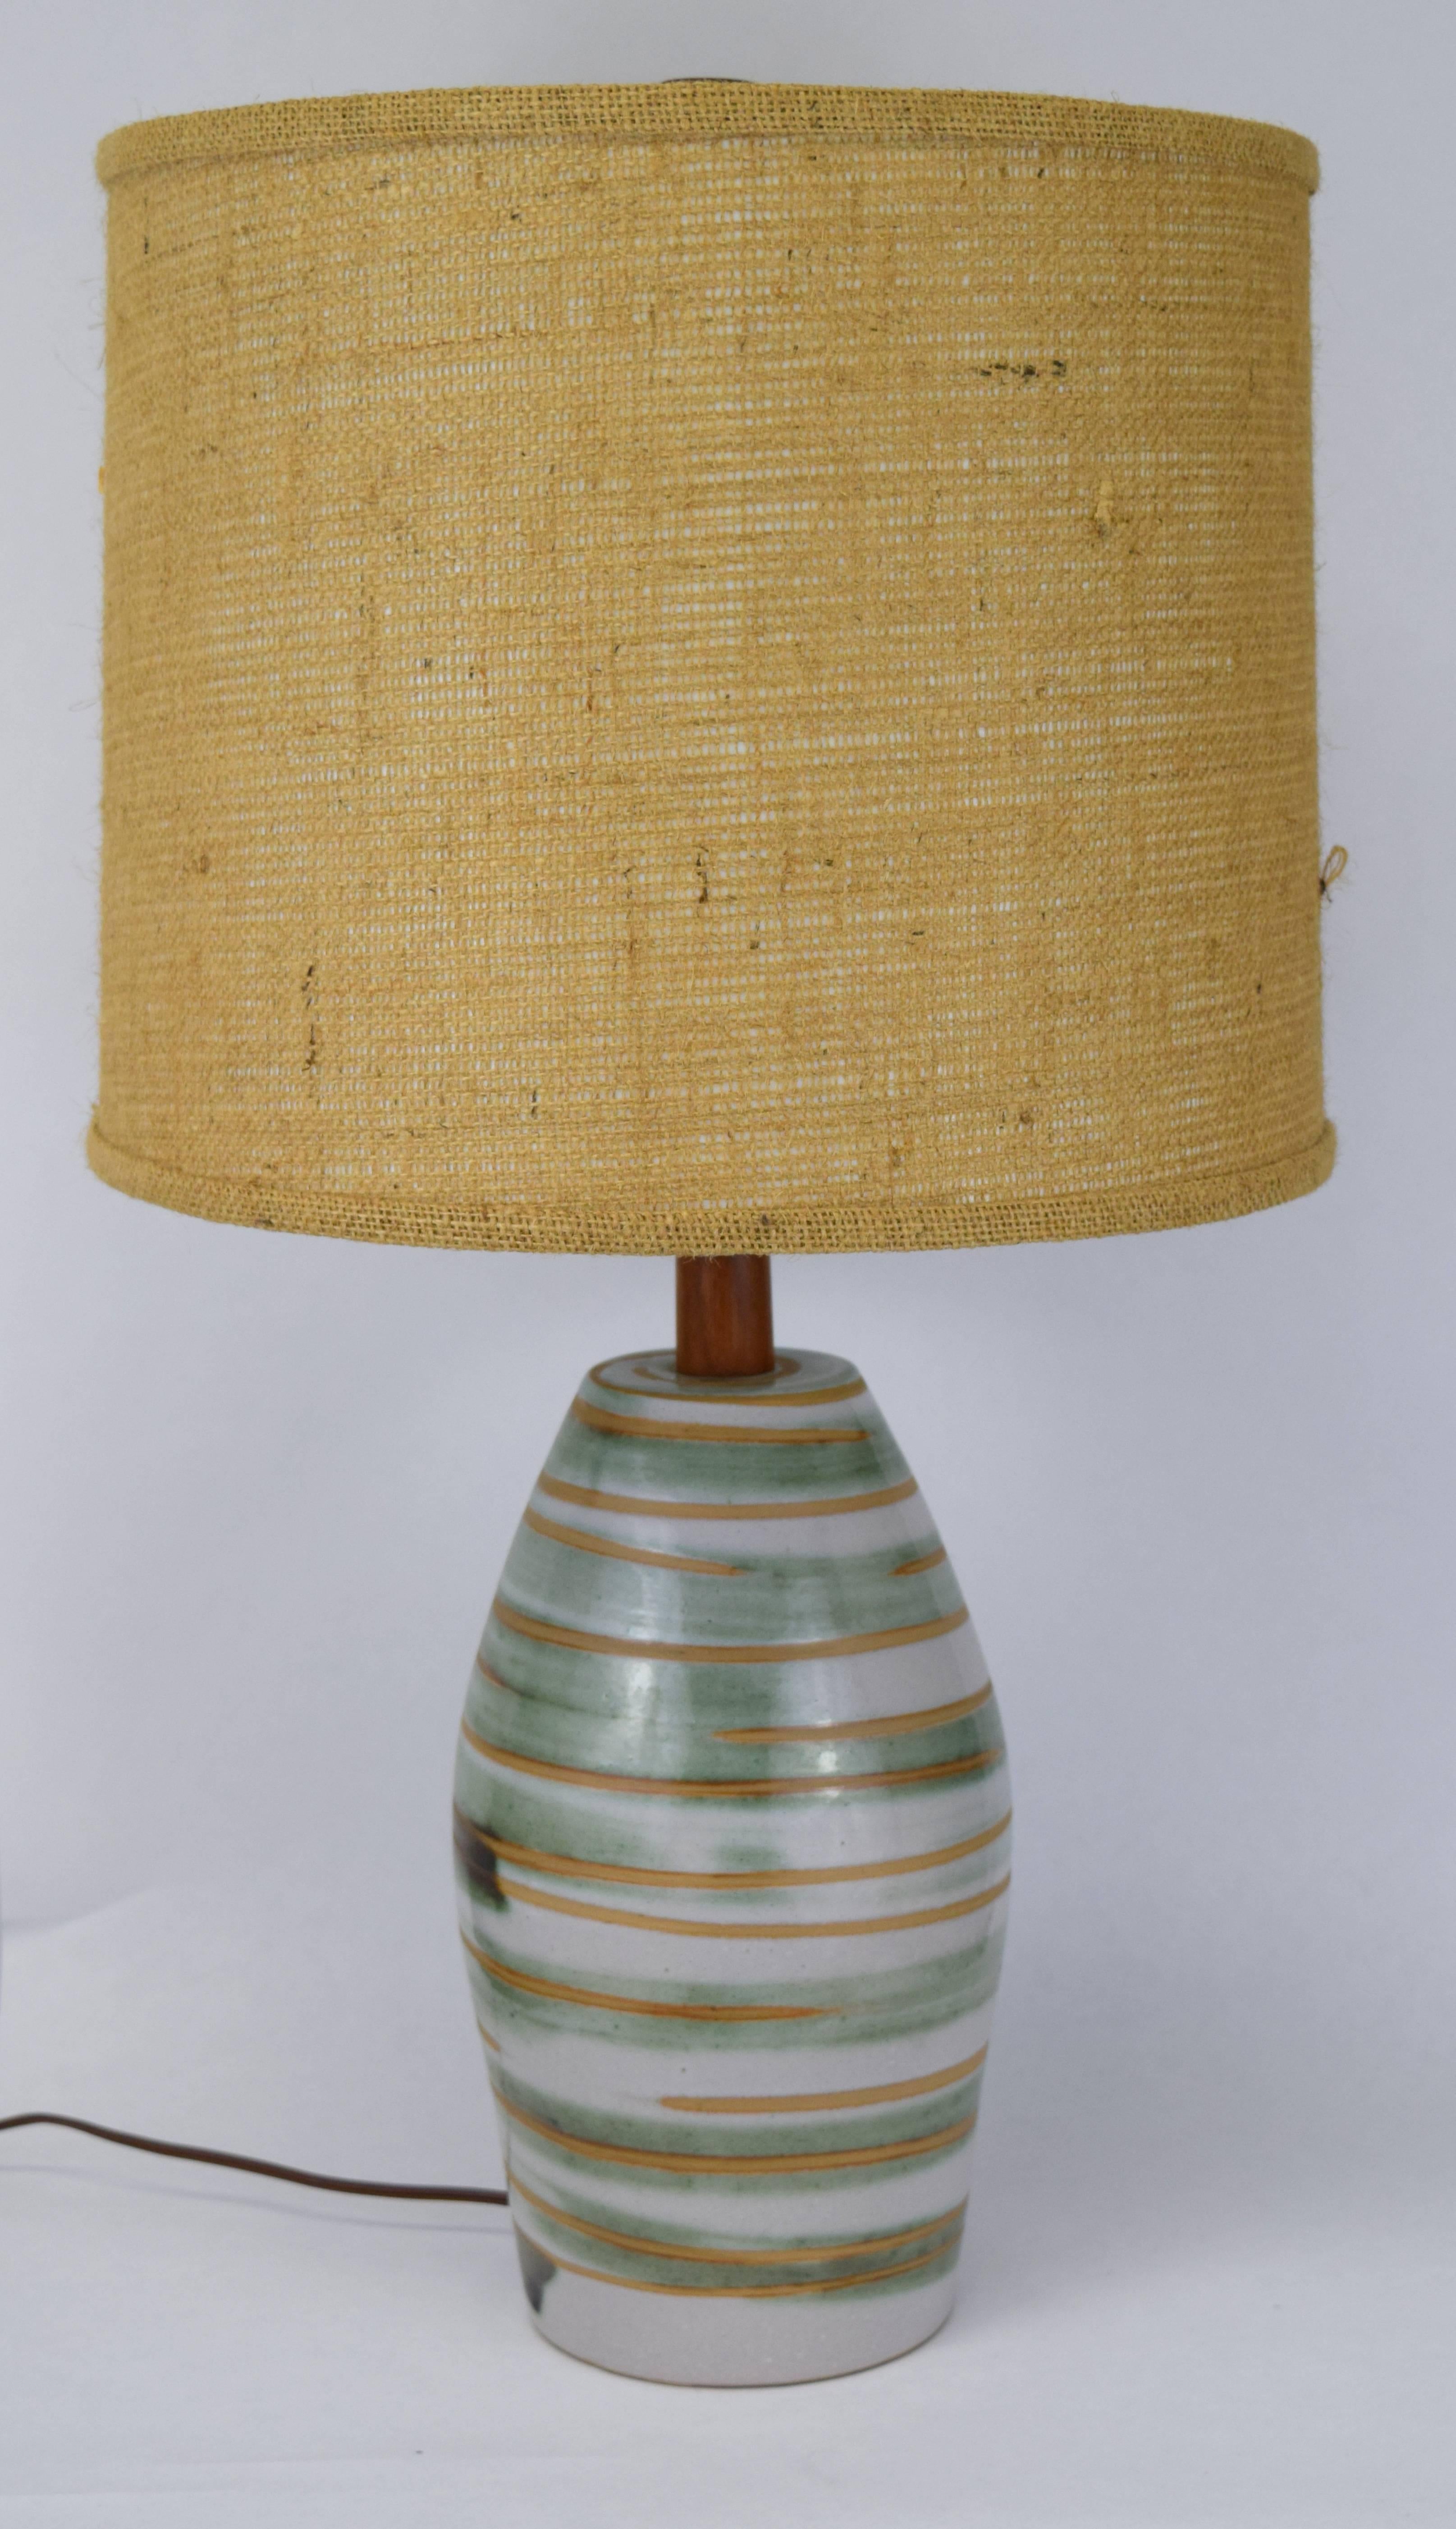 Medium size Marshall Studios swirled glaze table lamp with teak accents. Lovely green, cream, tan swirls to base with incised signature and original UL sticker to socket. Measures: 15.5